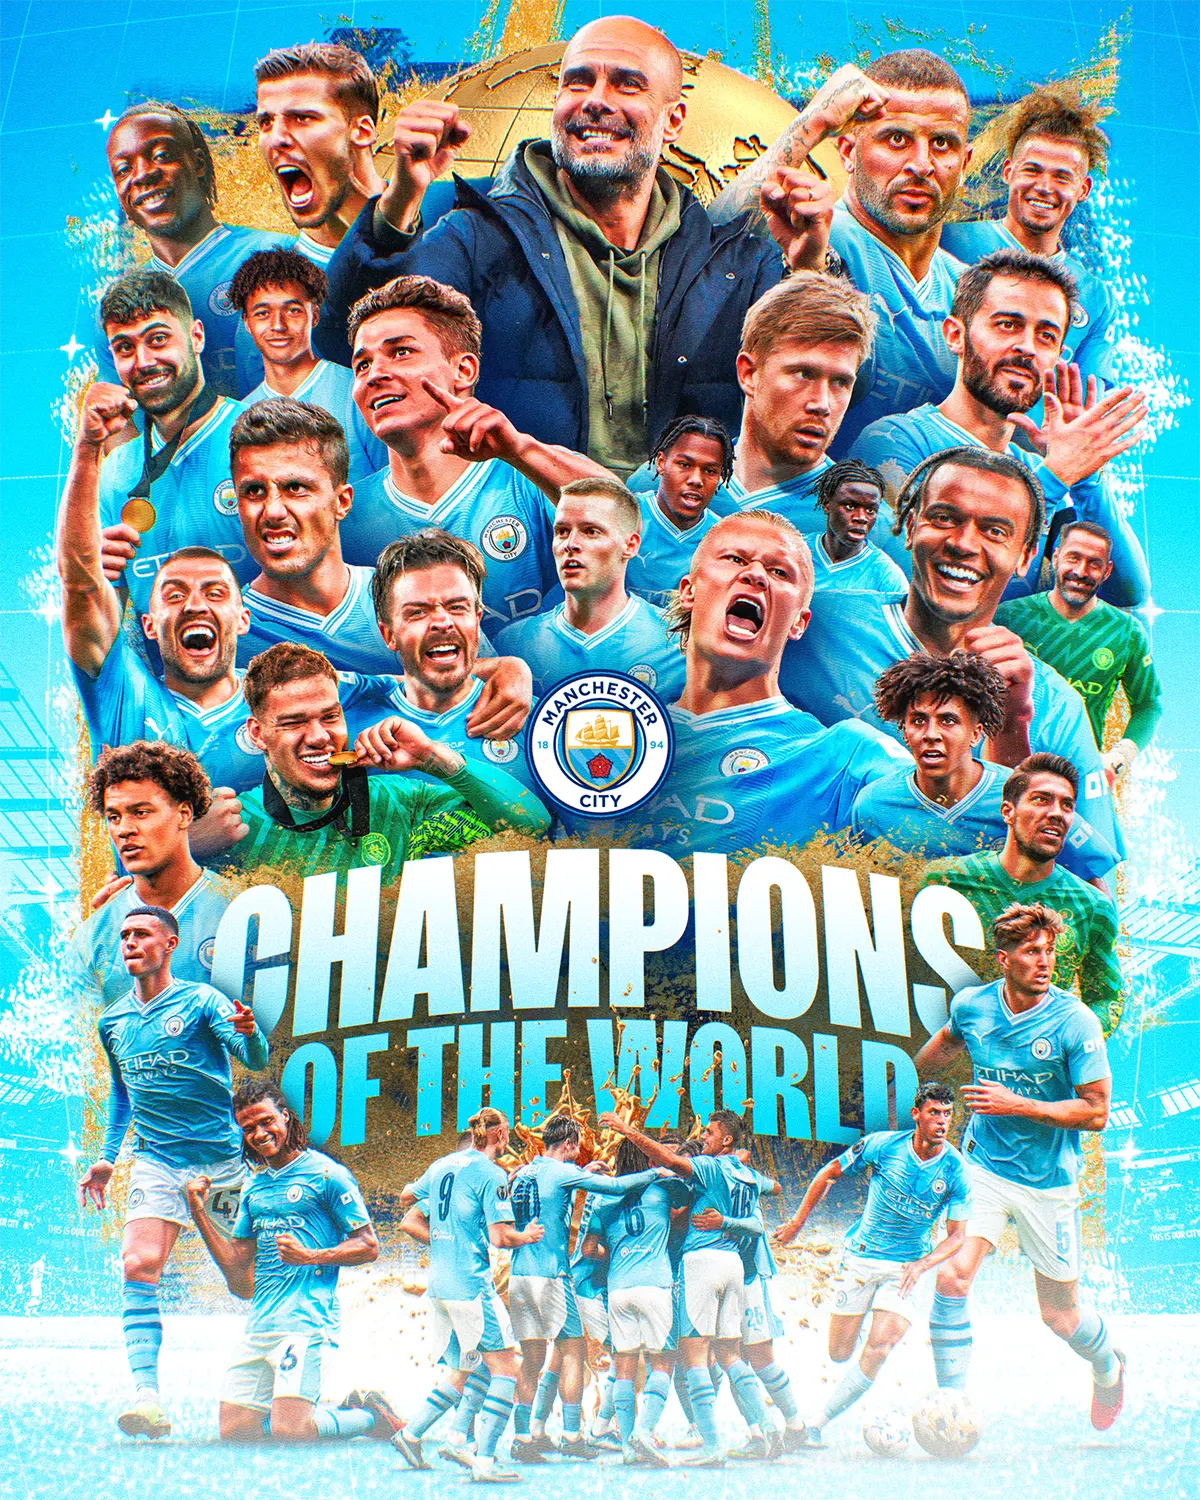 Official artwork celebrating Manchester City FC being named Champions of the World 2023